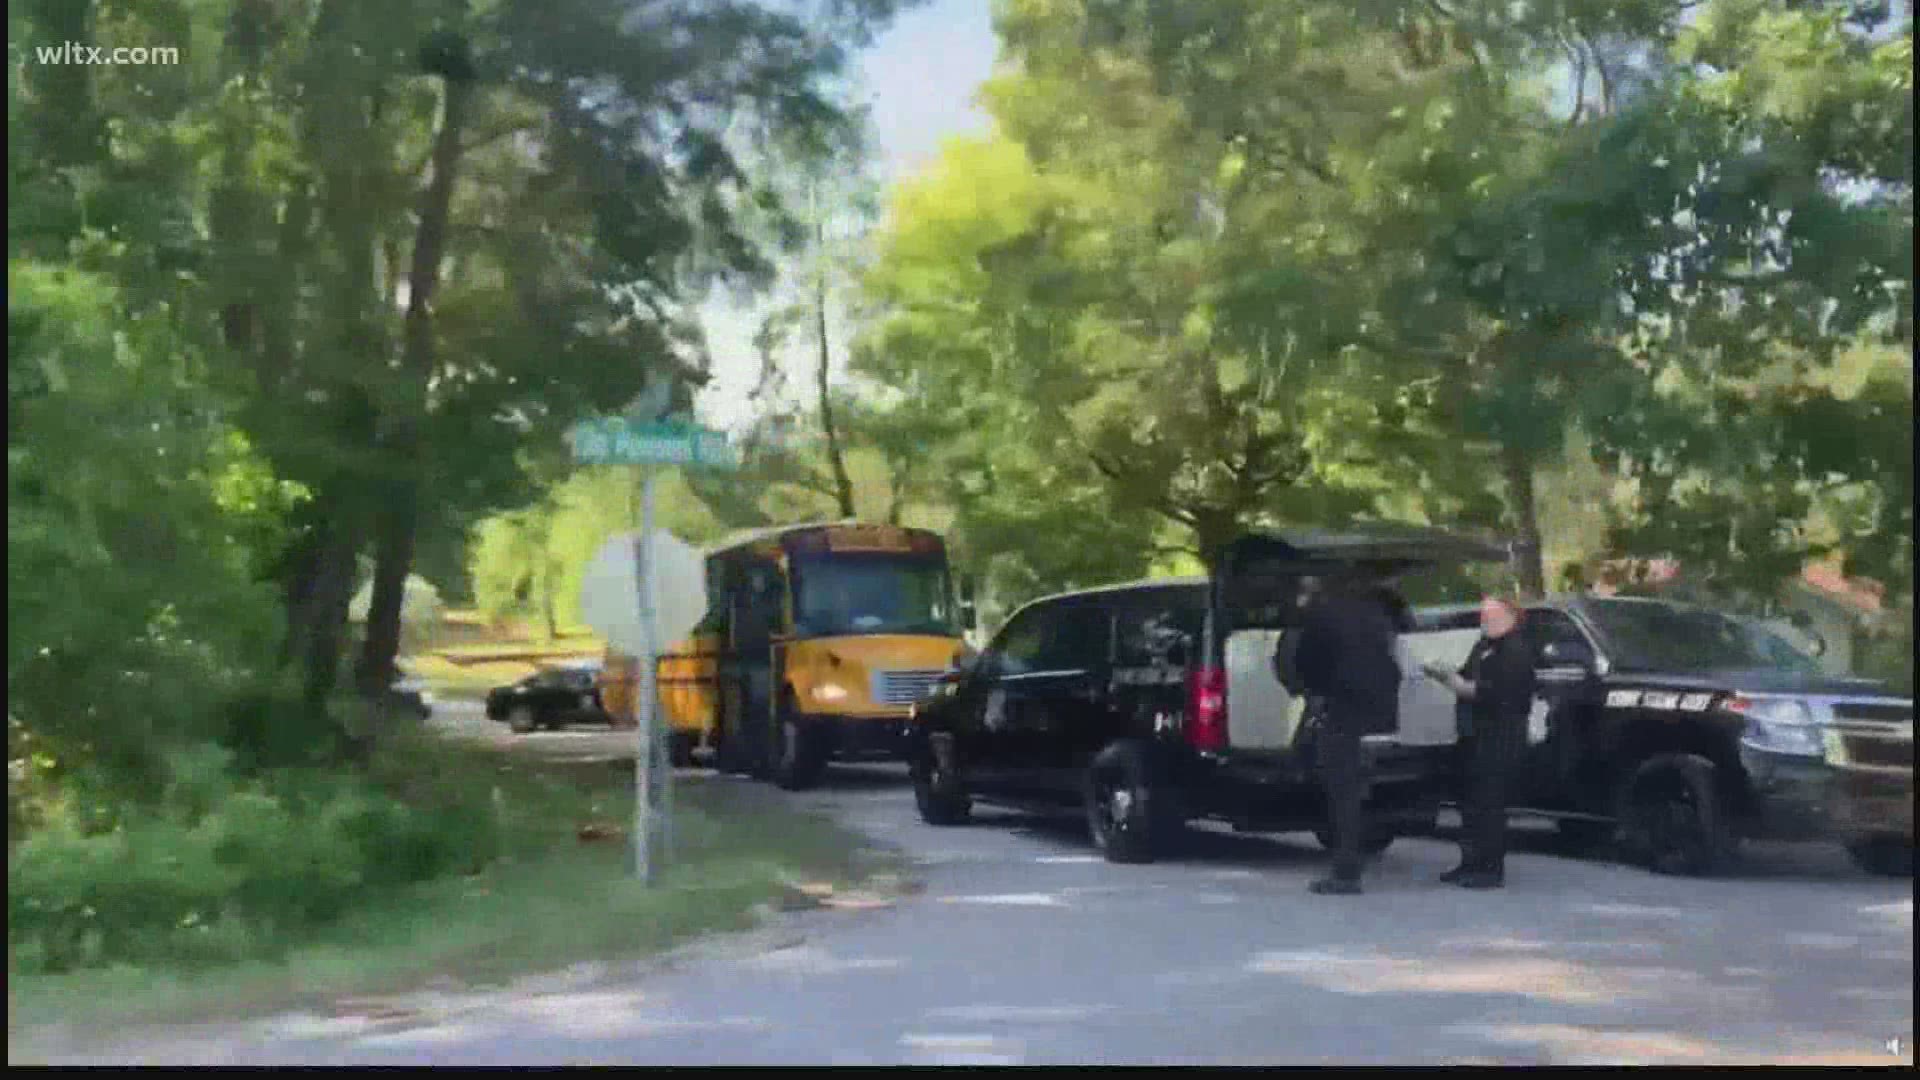 A Ft. Jackson trainee is being accused of hijacking a school bus with 18 students on board. The kids are now safe.